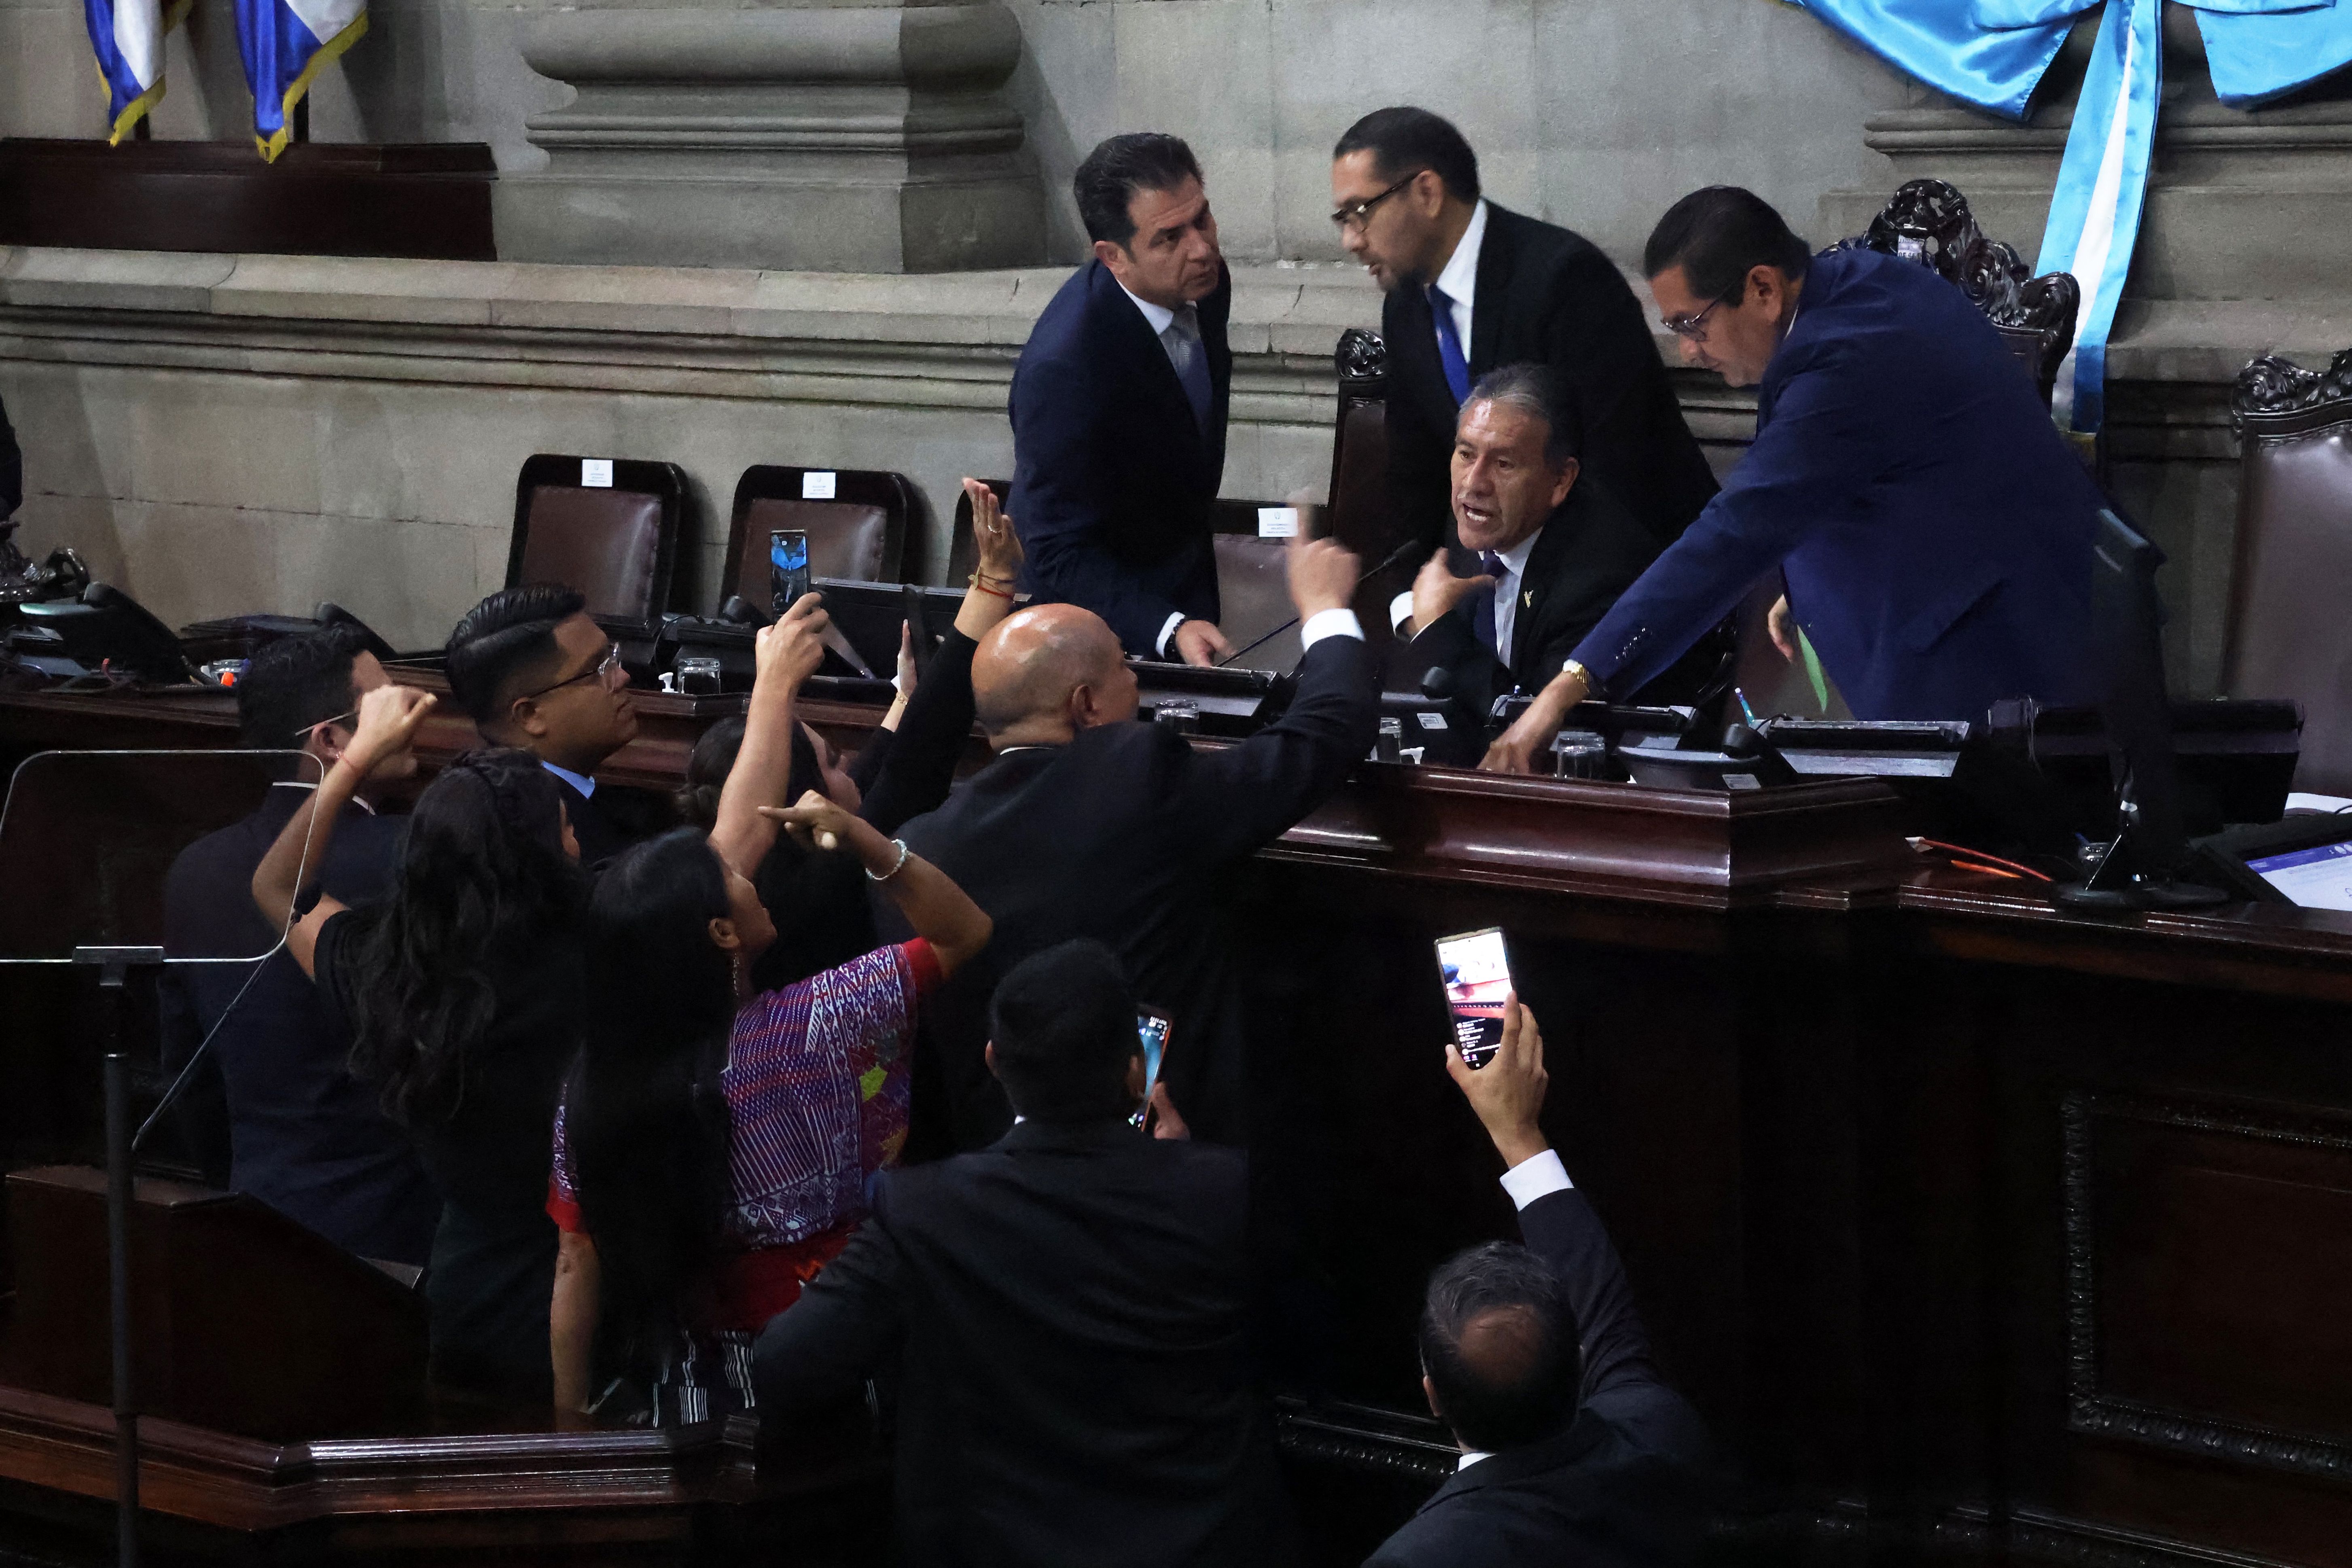 Guatemalan lawmakers wearing suits and dress clothes yell and point fingers at each other during a congressional session in which the swearing-in of President Arévalo.